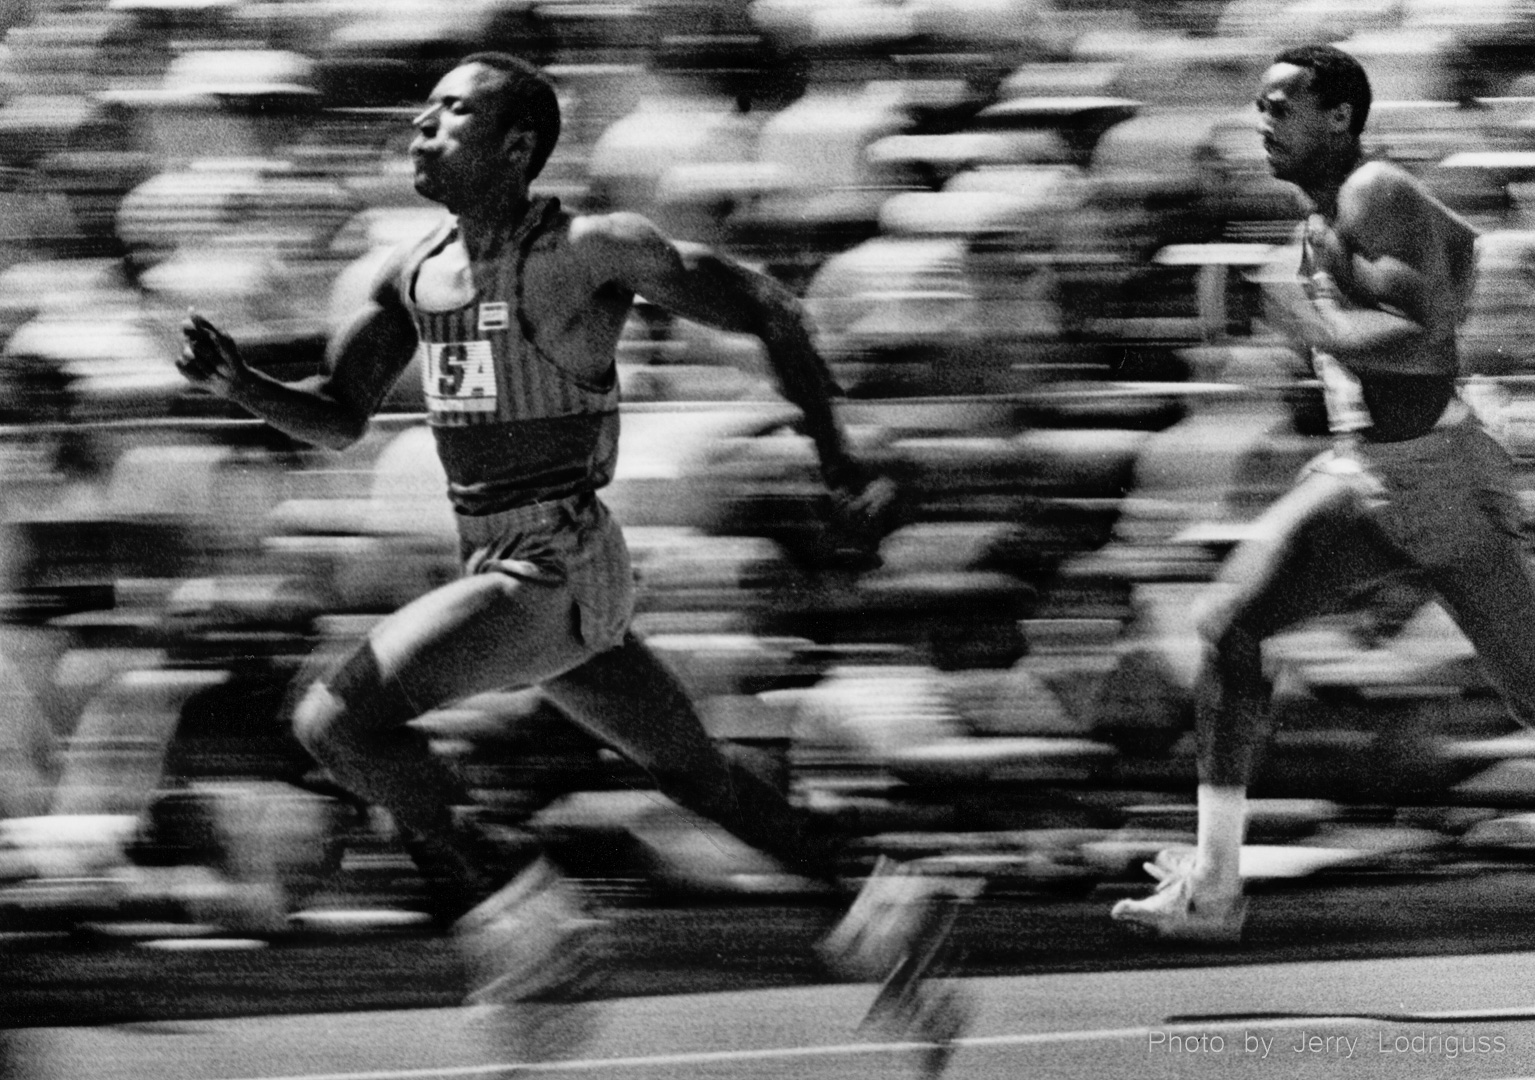 Calvin Smith streaks to a world record in the men's 100 meters with a time of 9.93 seconds at the National Sports Festival in Colorado Springs on 7/3/1983.